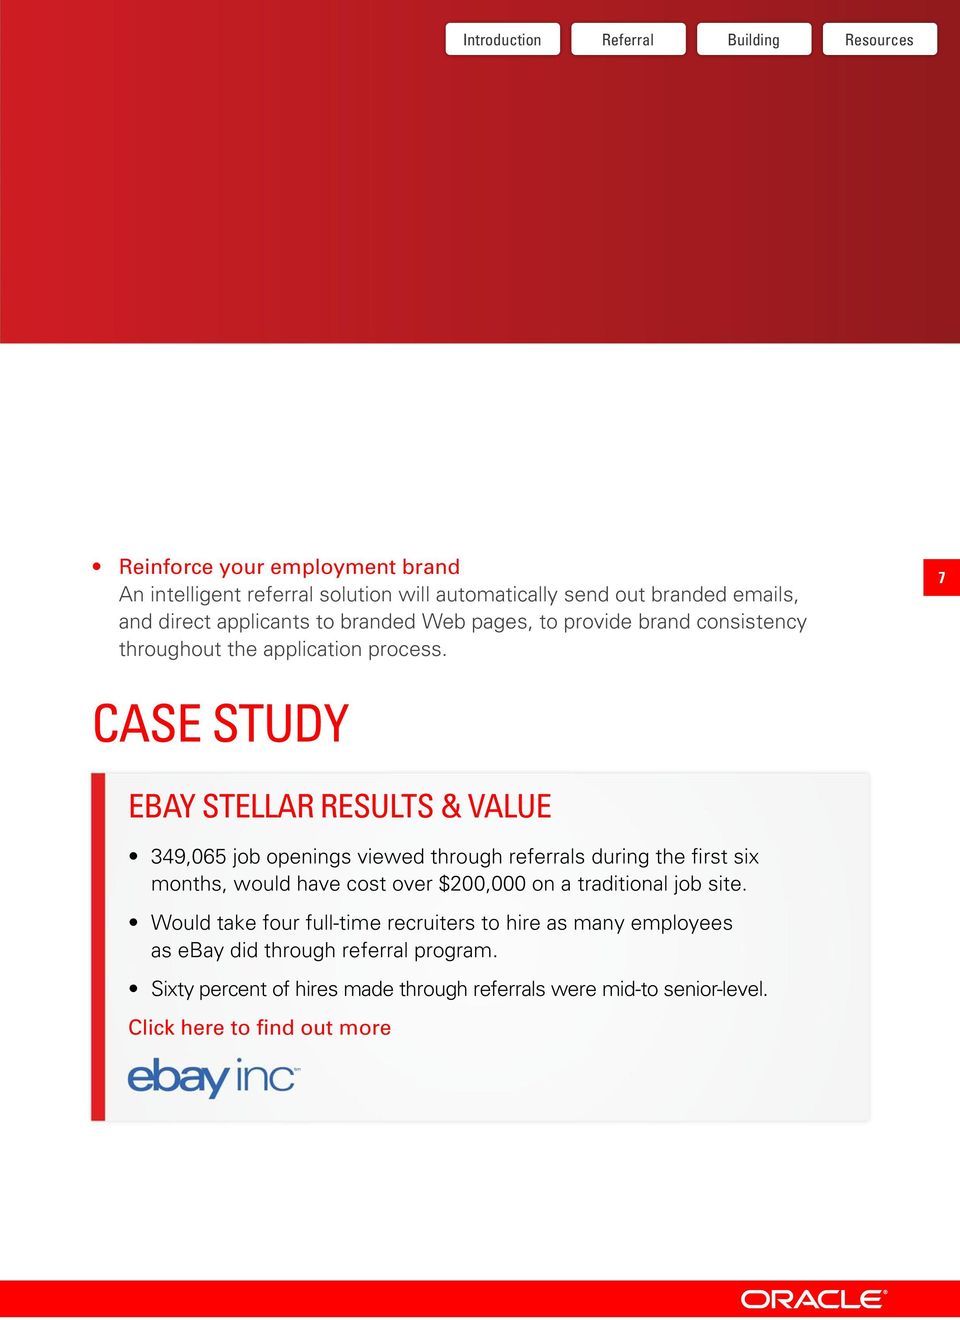 7 CASE STUDY EBAY STELLAR RESULTS & VALUE 349,065 job openings viewed through referrals during the first six months, would have cost over $200,000 on a